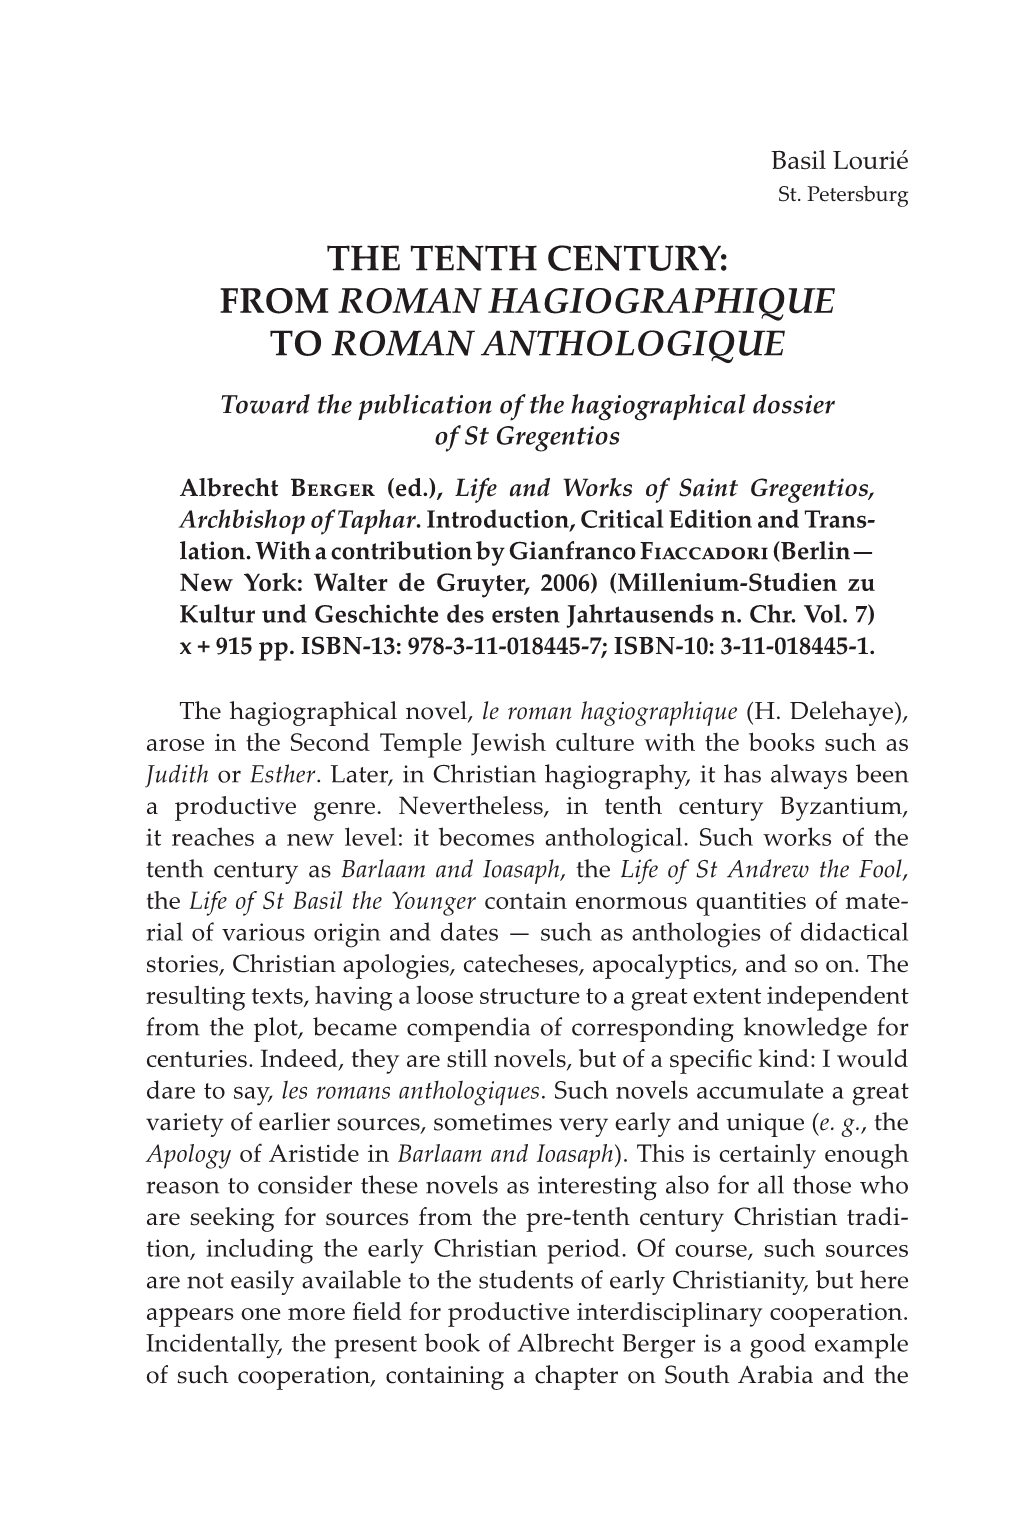 The Tenth Century: from Roman Hagiographique to Roman Anthologique